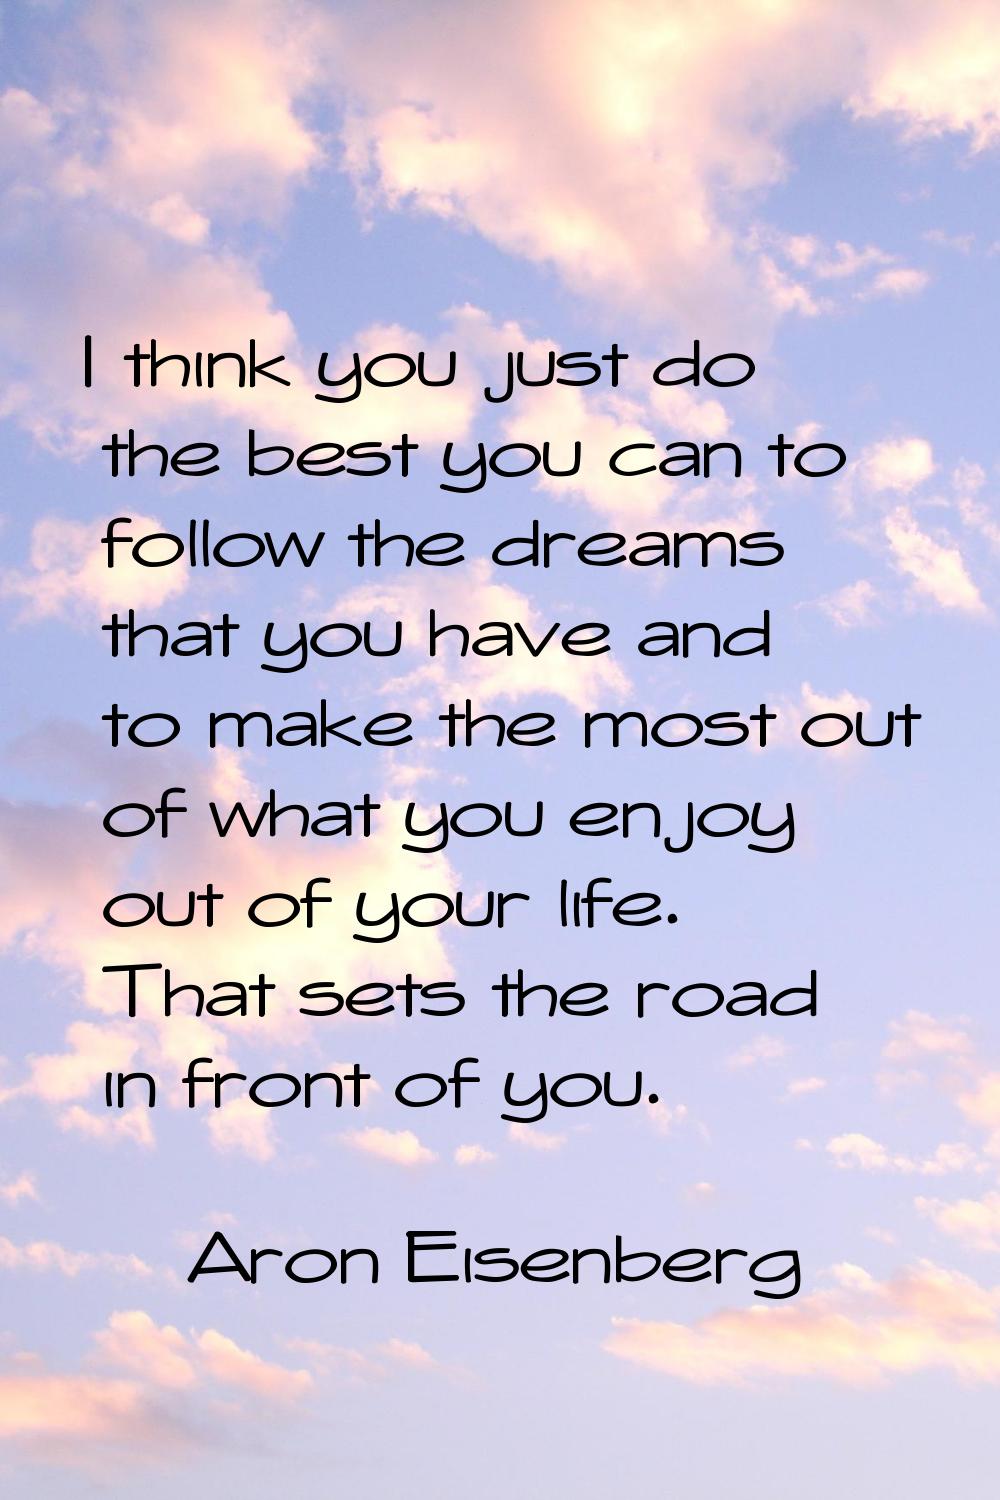 I think you just do the best you can to follow the dreams that you have and to make the most out of